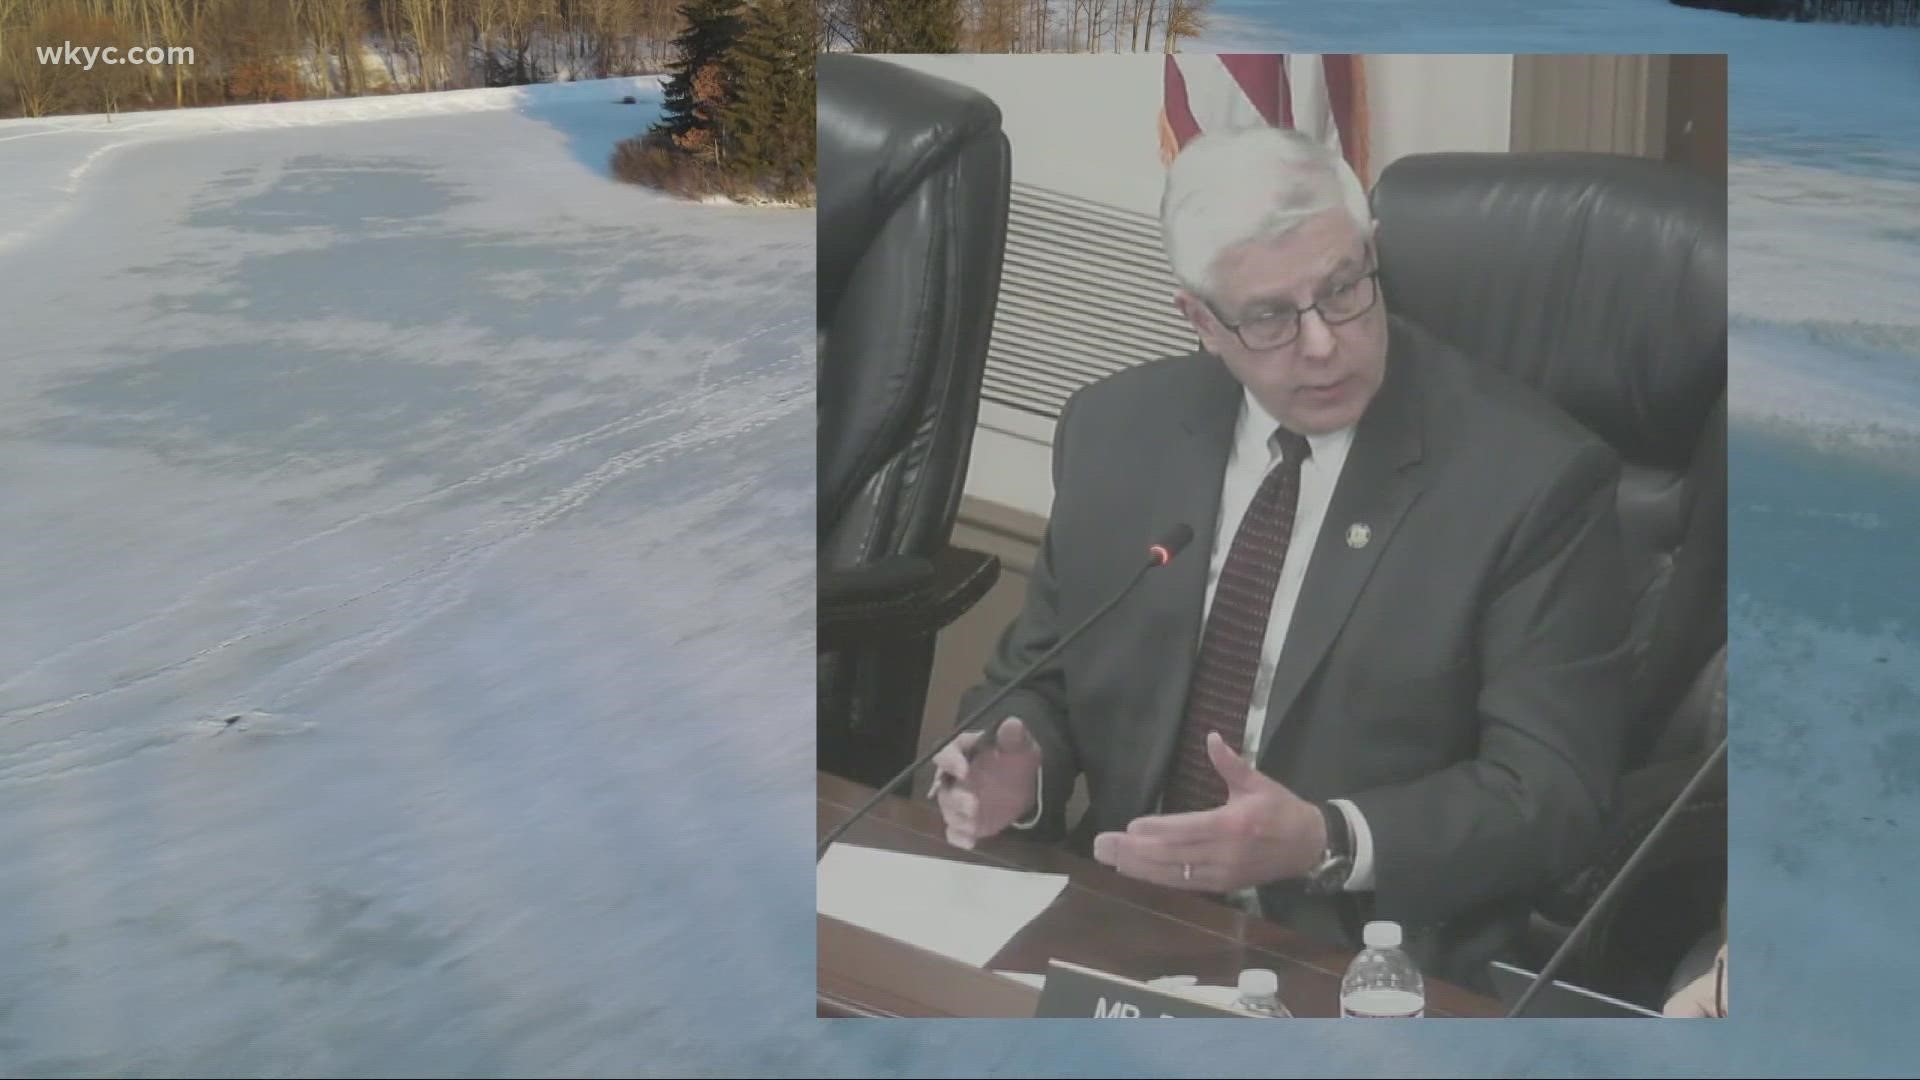 During a Hudson city council meeting on Tuesday, Mayor Craig Shubert expressed concern that ice fishing could lead to prostitution.